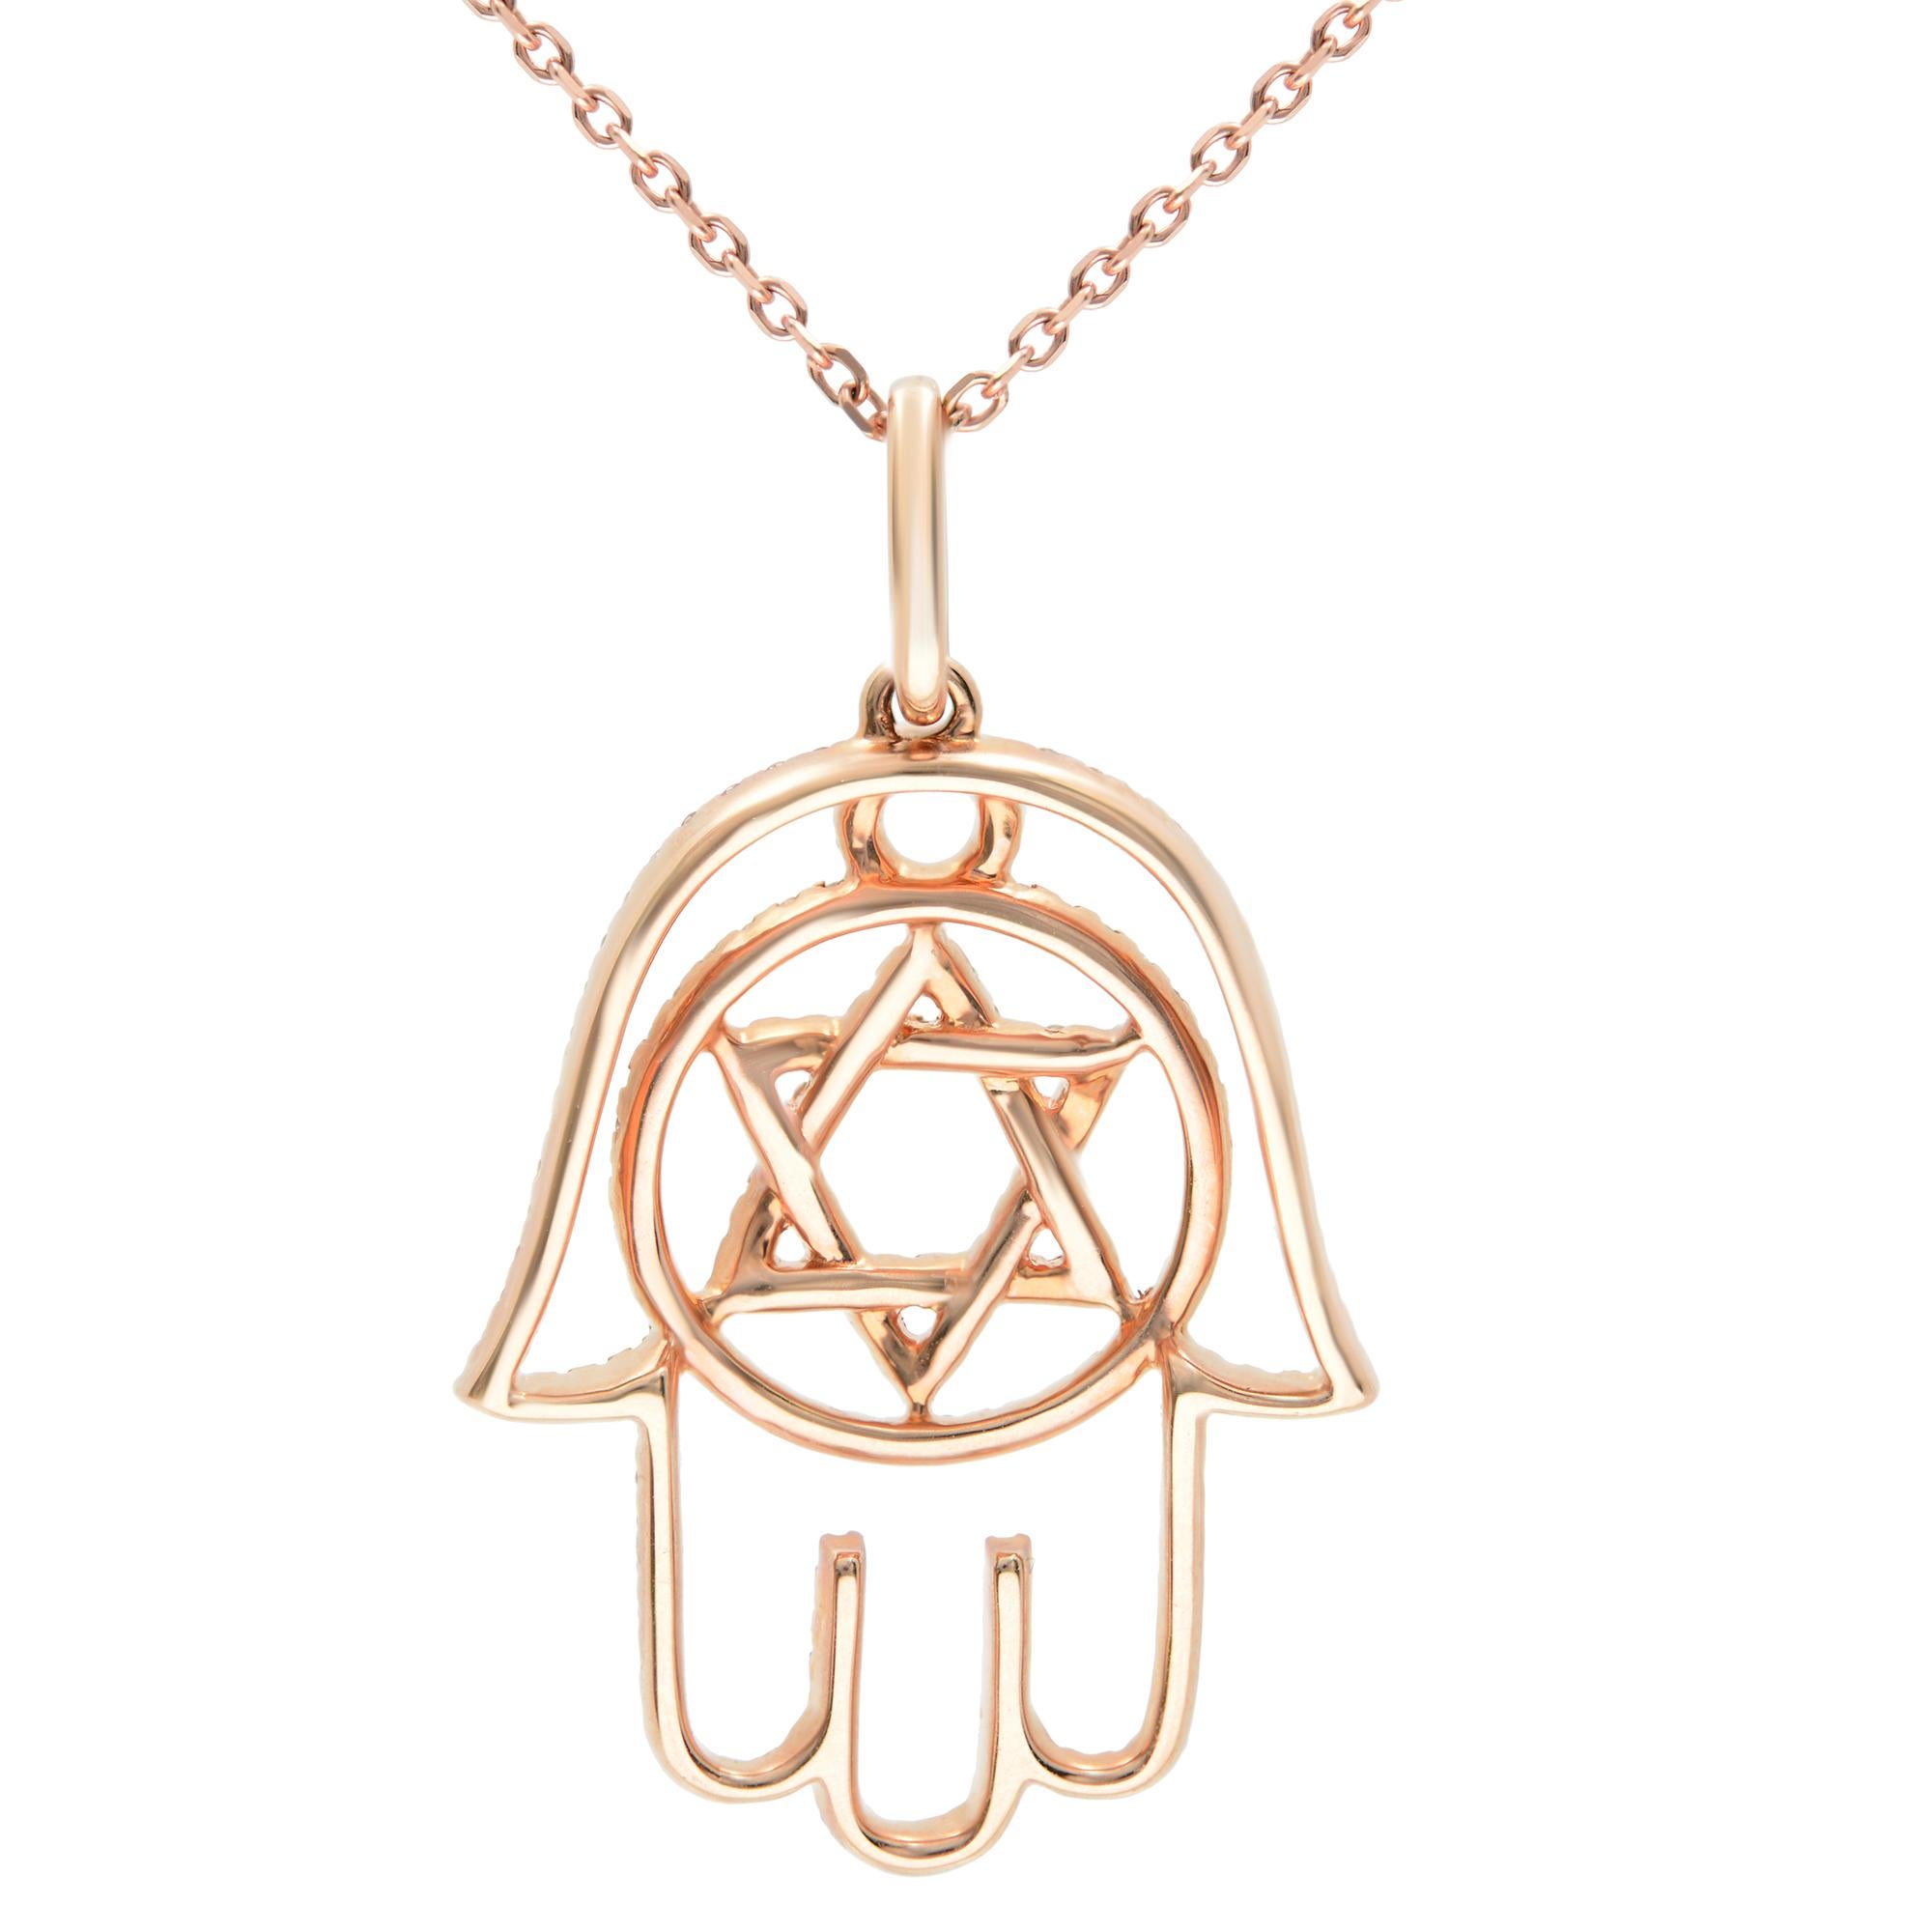 The Star of David sign and the Hamsa symbols are unified in this majestic pendant that features 0.47 brilliant round white diamonds in micro pave setting. Crafted in 14k rose gold. Diamond color G-H and VS-SI clarity. Pendant size: 25x19mm. Chain